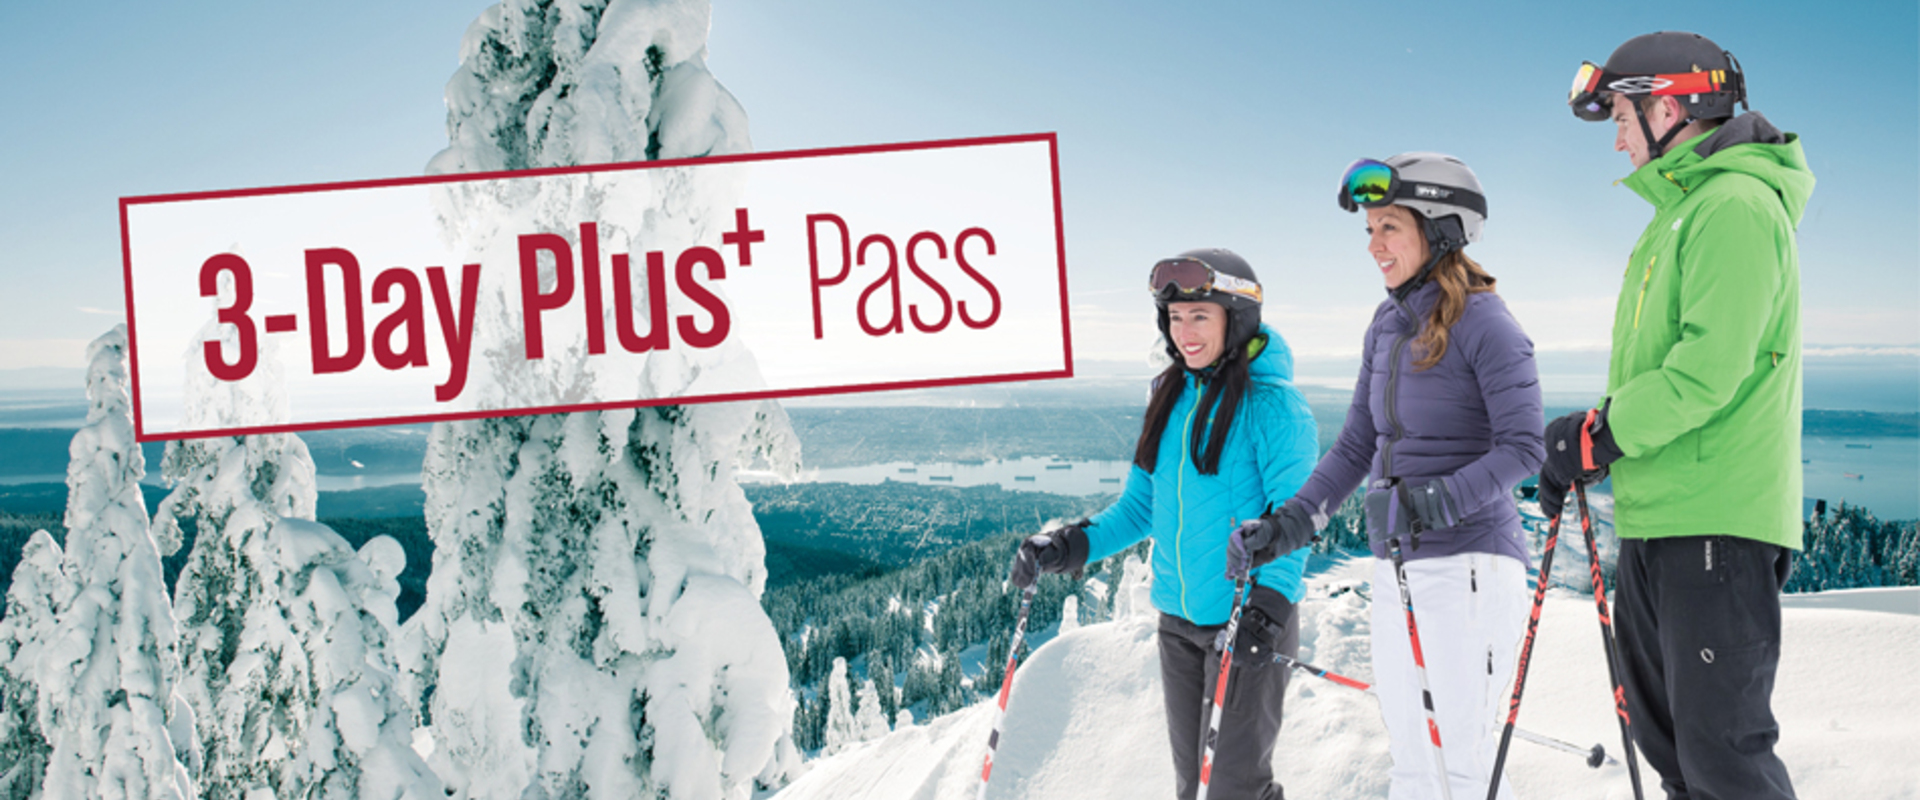 Enjoy flexibility with a 3-Day Plus Pass this winter